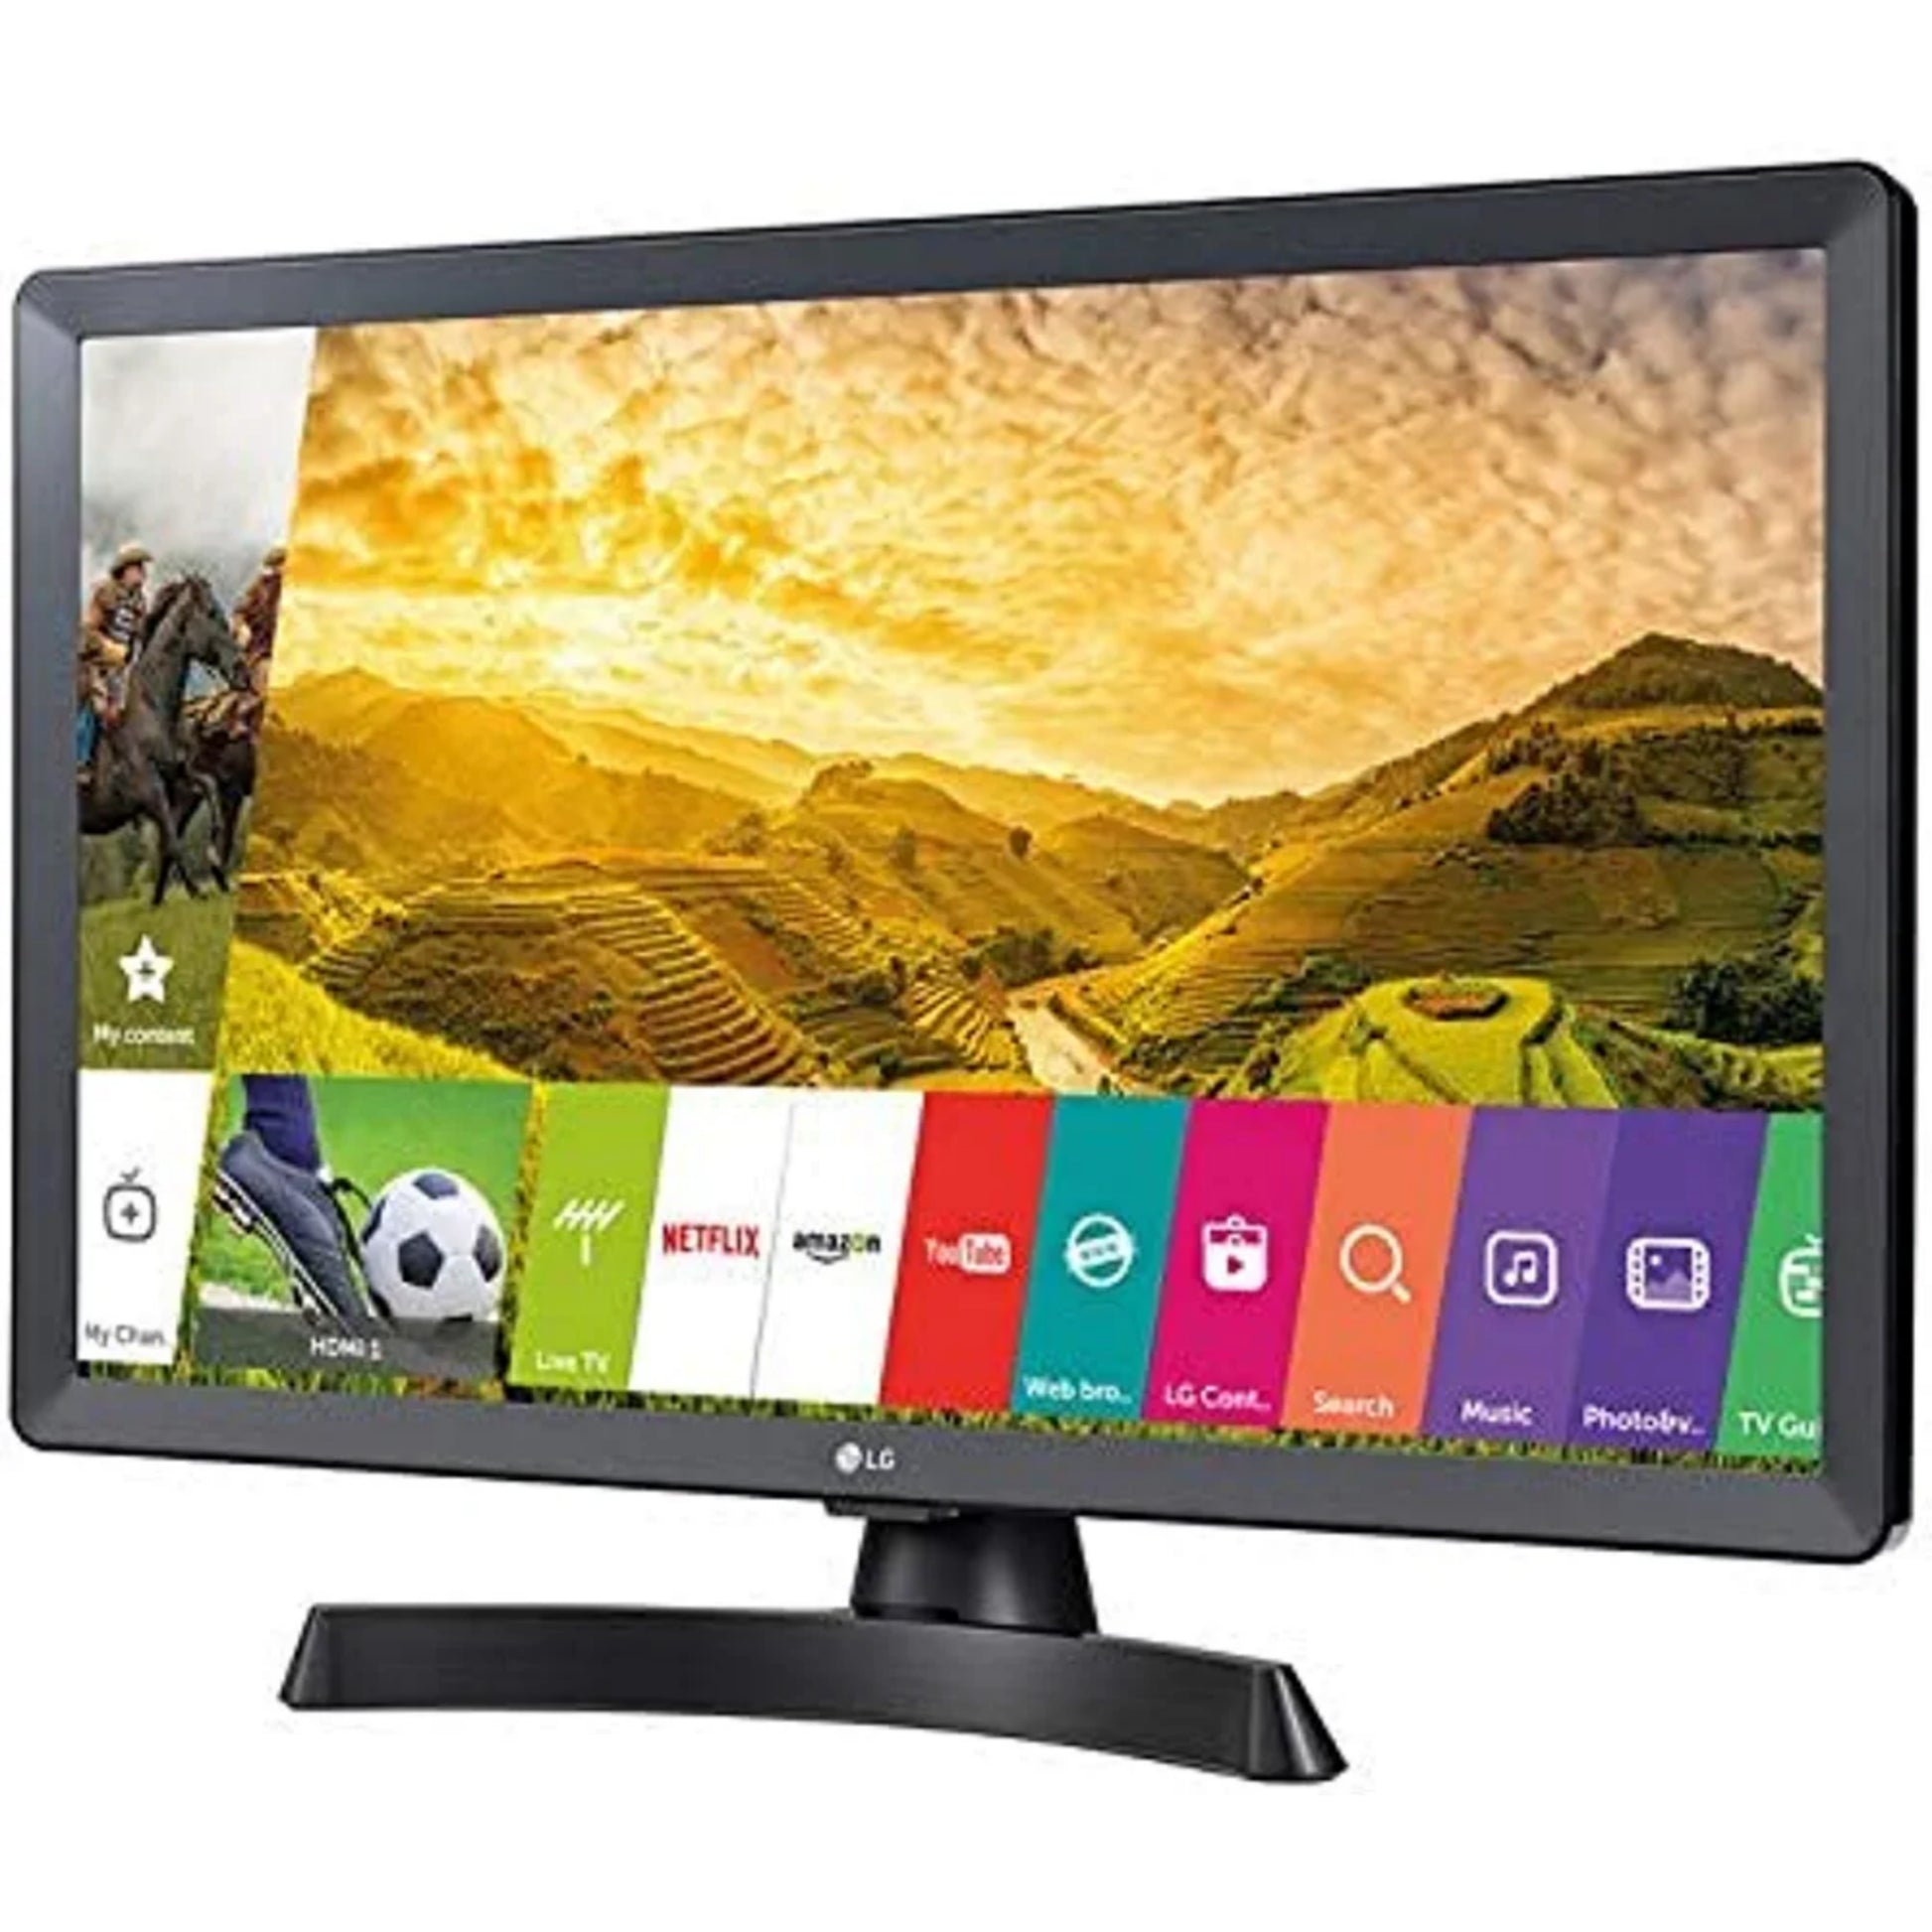 LG 24 inch 24TL510S webOS Smart Satellite HD Ready LED TV (Built-in WiFi, Miracast) - Foreign Used